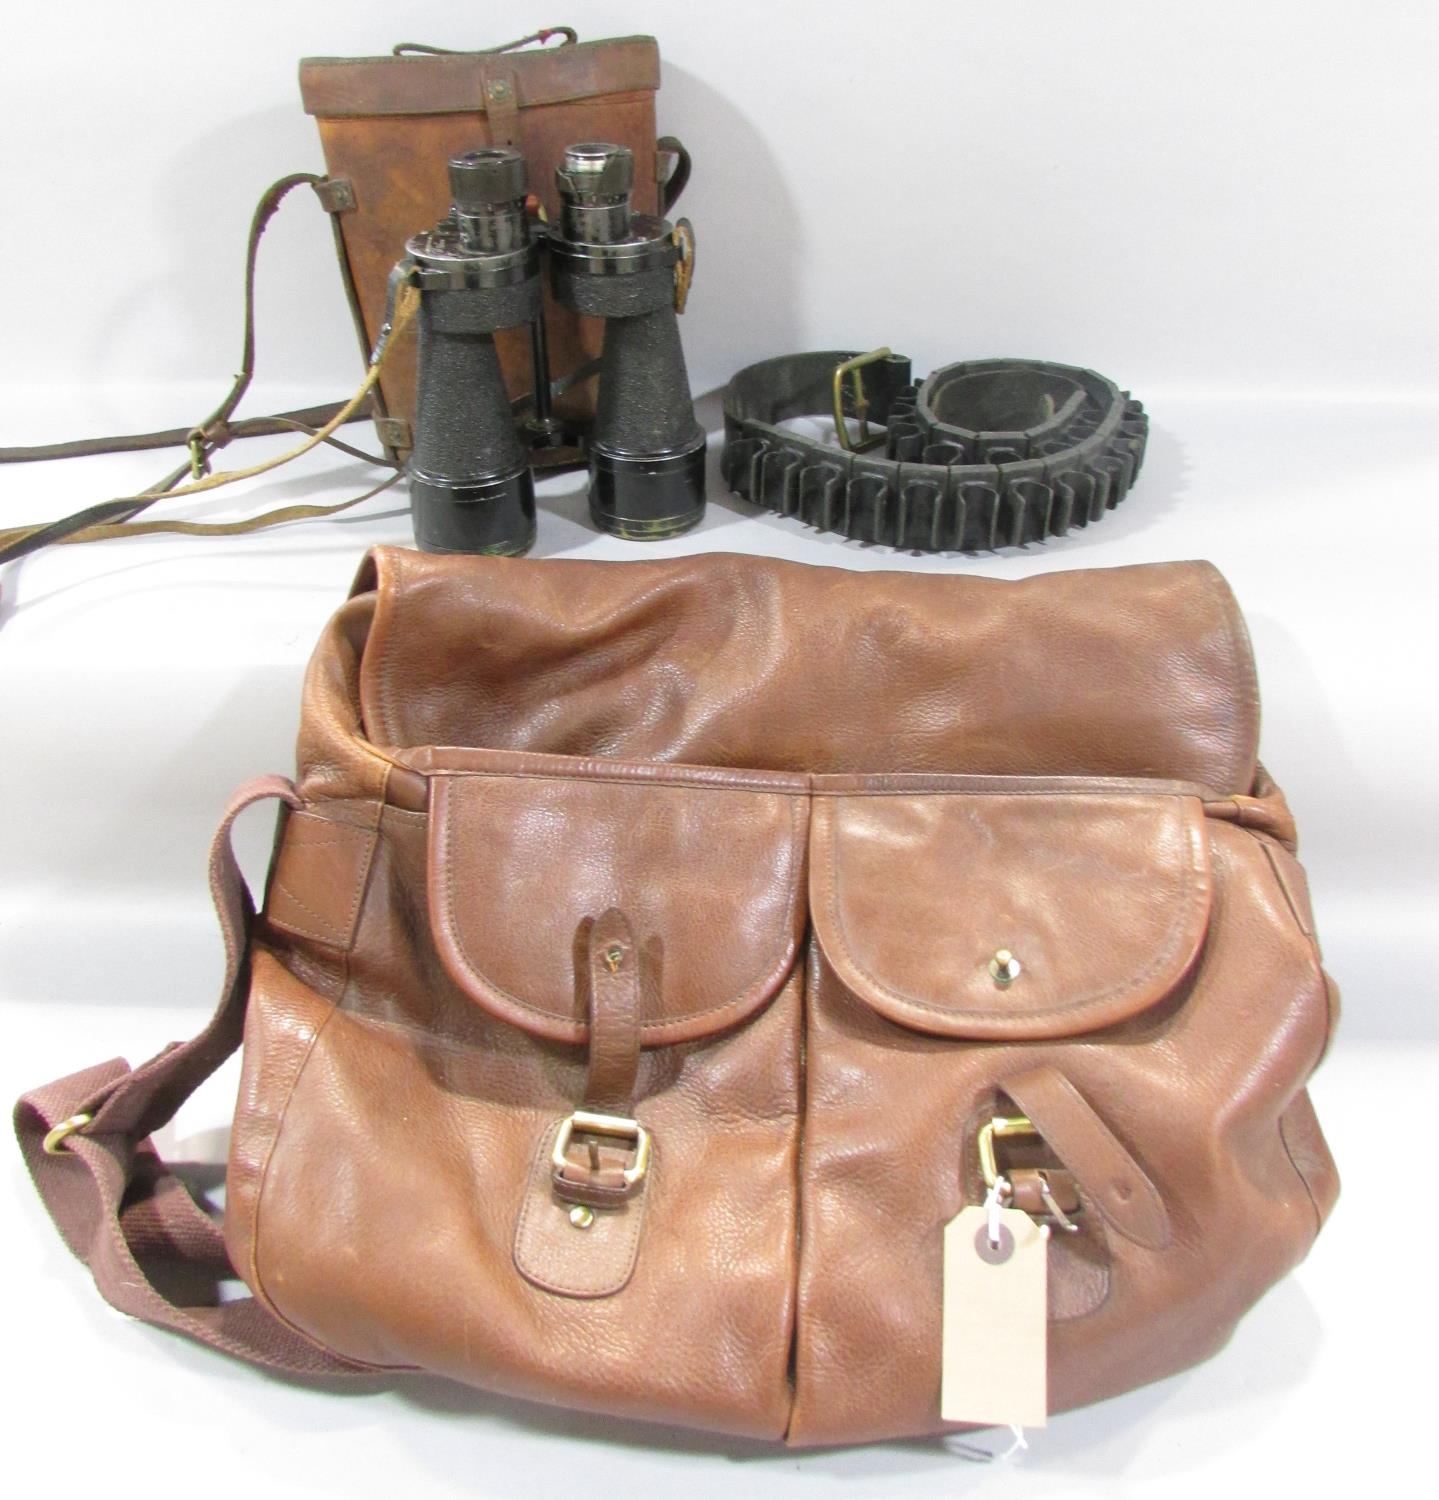 A pair of vintage binoculars and leather case, together with a leather shoulder bag and a